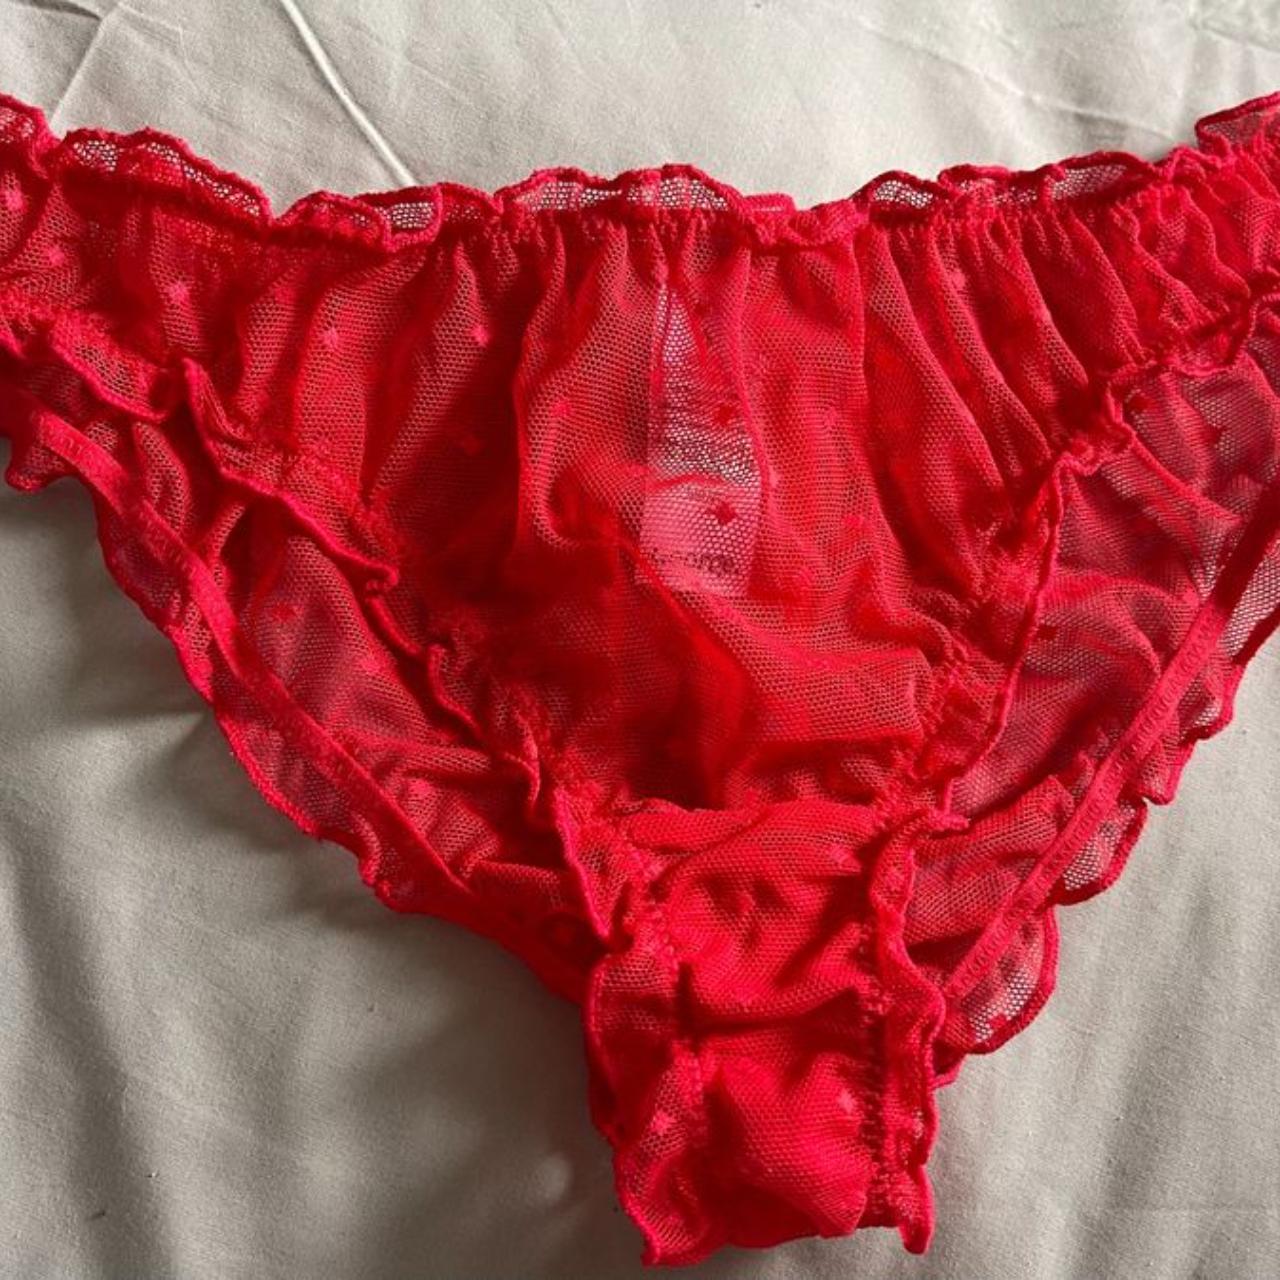 George Asda Red Mesh Brazilians These panties are a... - Depop